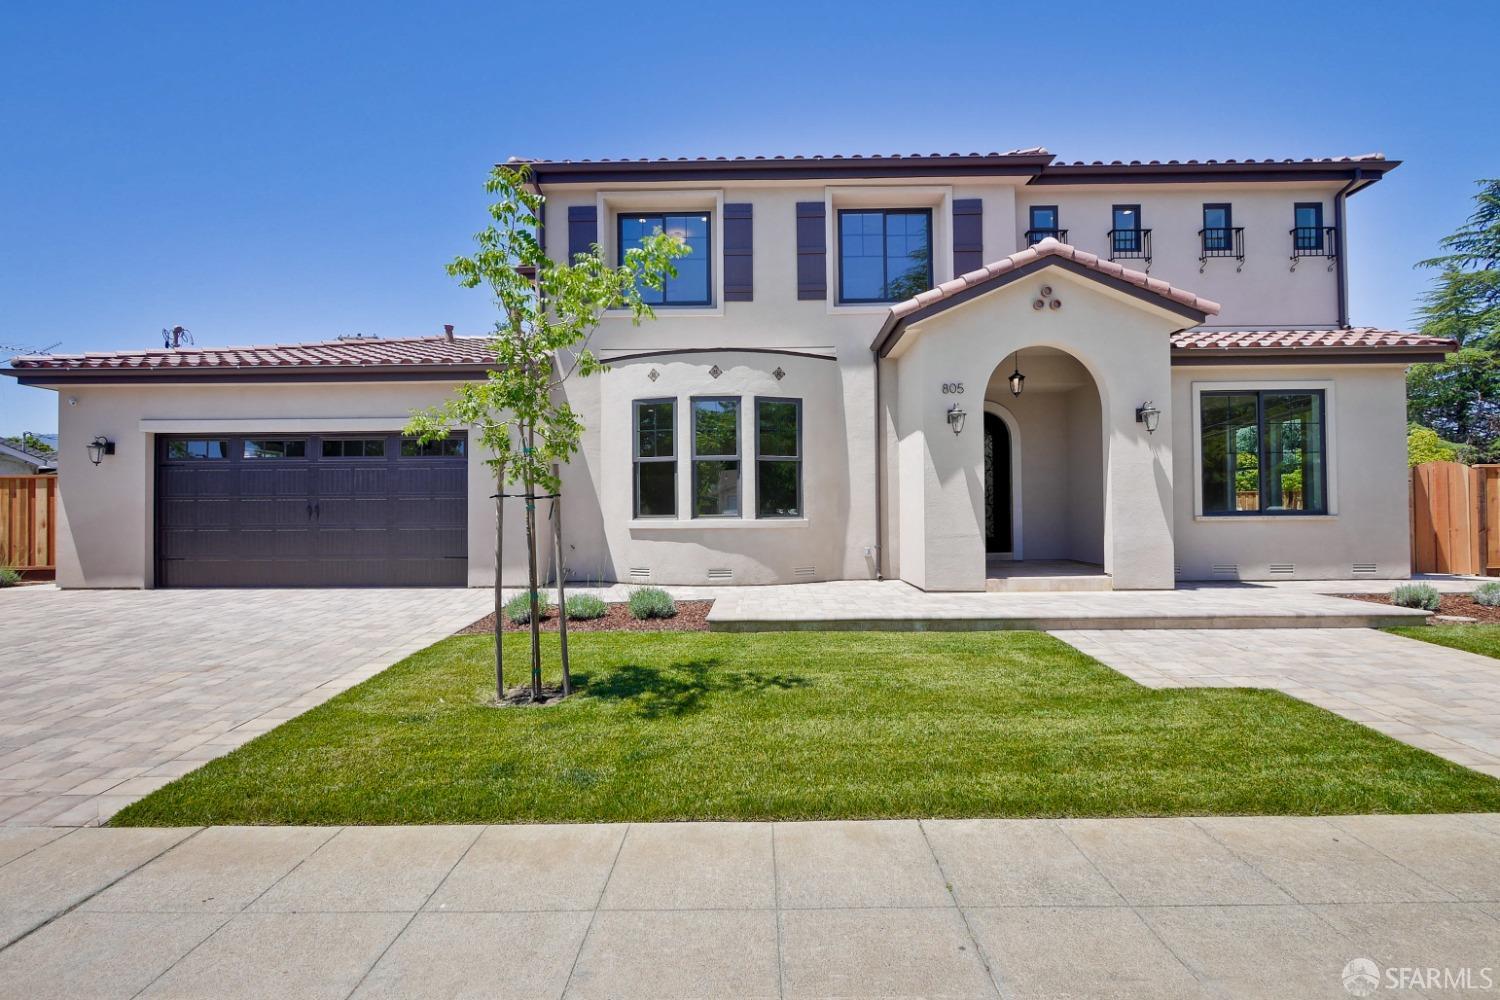 Photo of 805 Rose Blossom Dr in Cupertino, CA